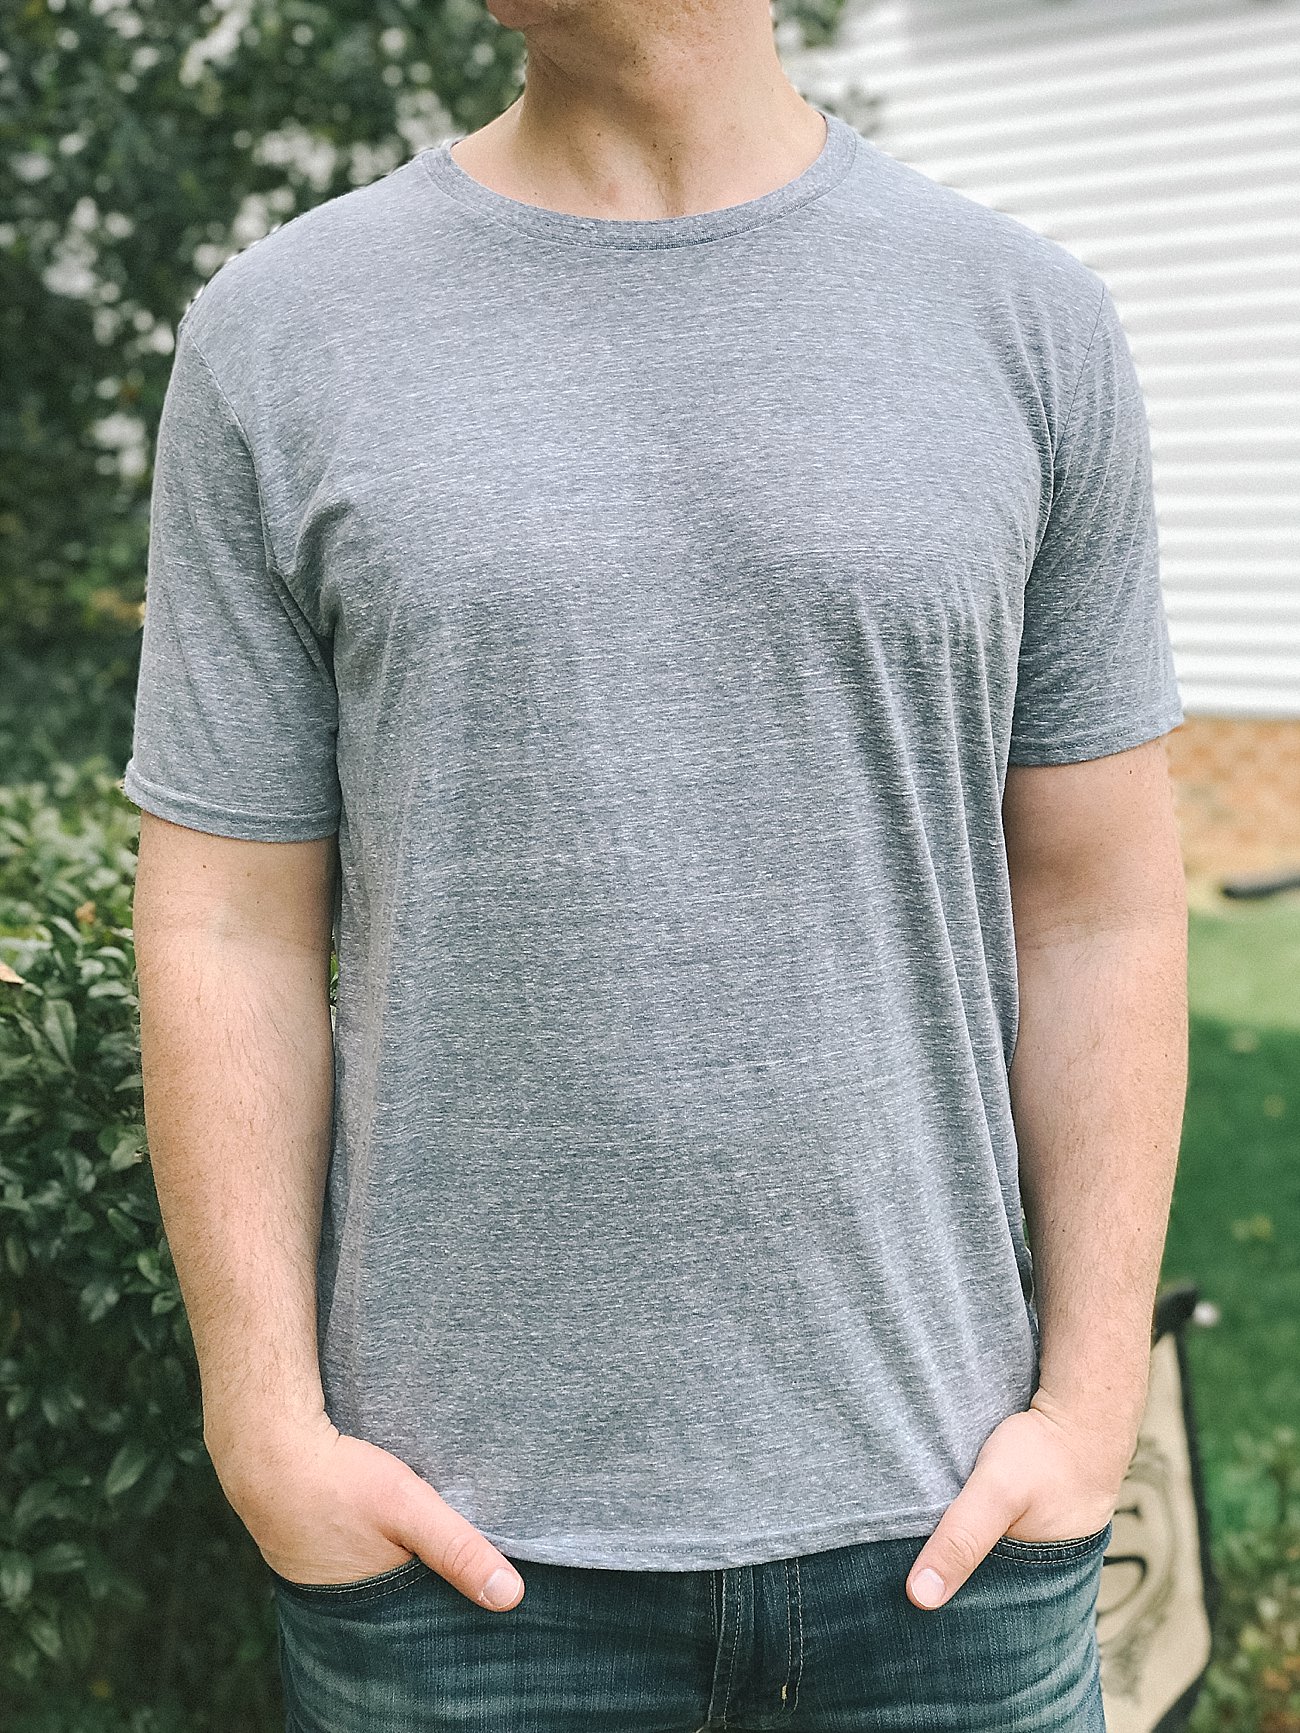 John's Second Stitch Fix for Men Review & Stitch Fix Giveaway by fashion blogger Still Being Molly